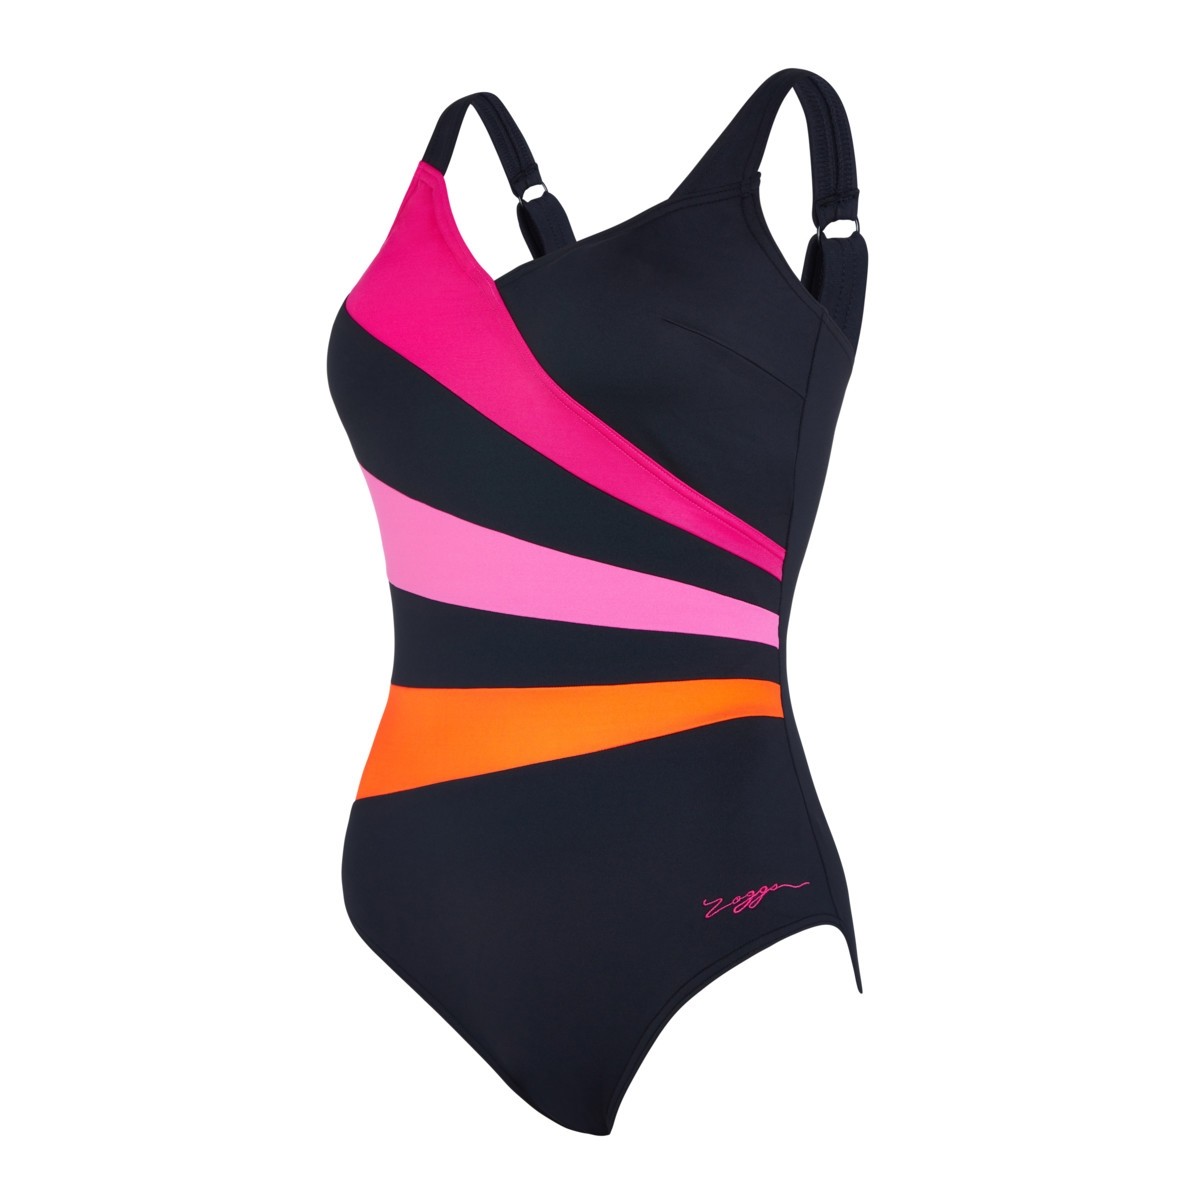 Zoggs Wrap Panel Adjustable Classic Back One Piece - Black/Pink